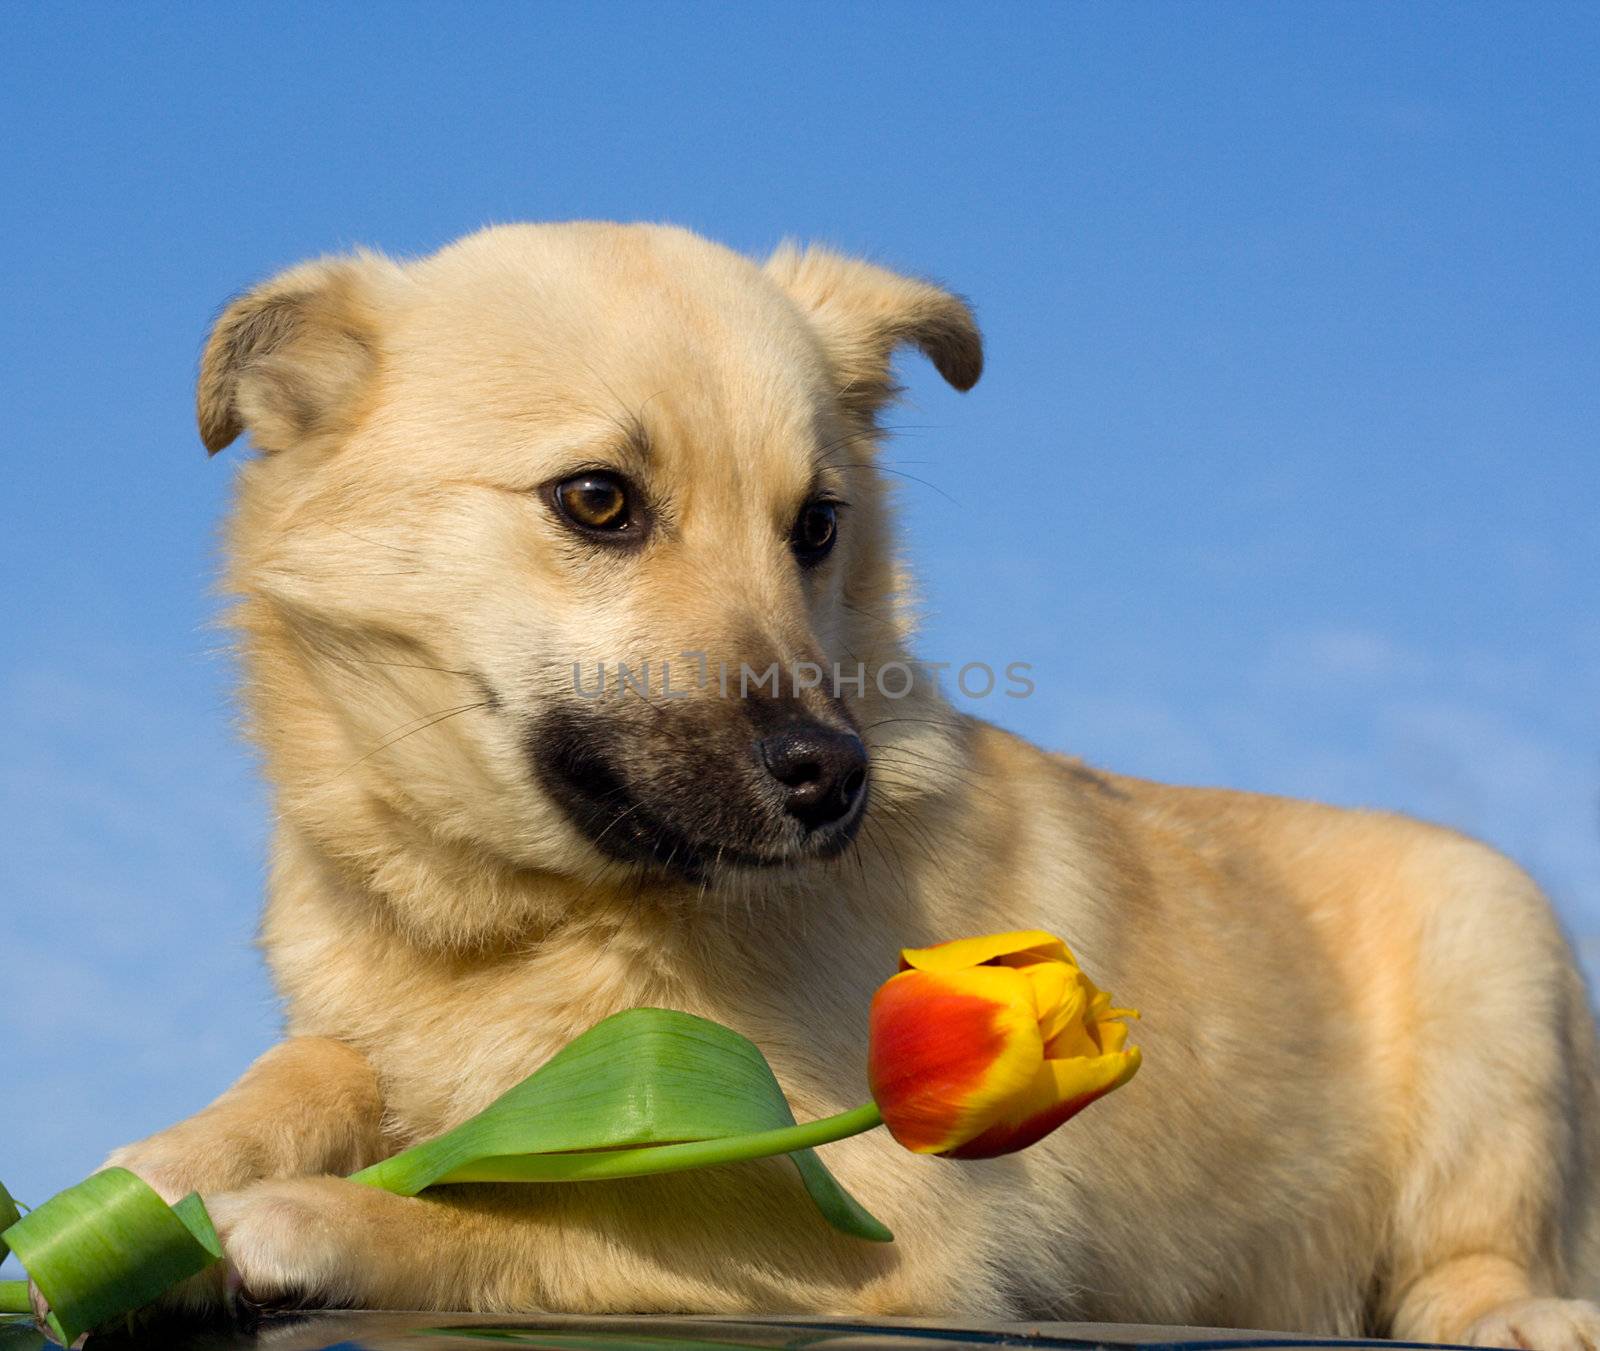 close-up puppy dog  with tulip in forefoots against blue sky background